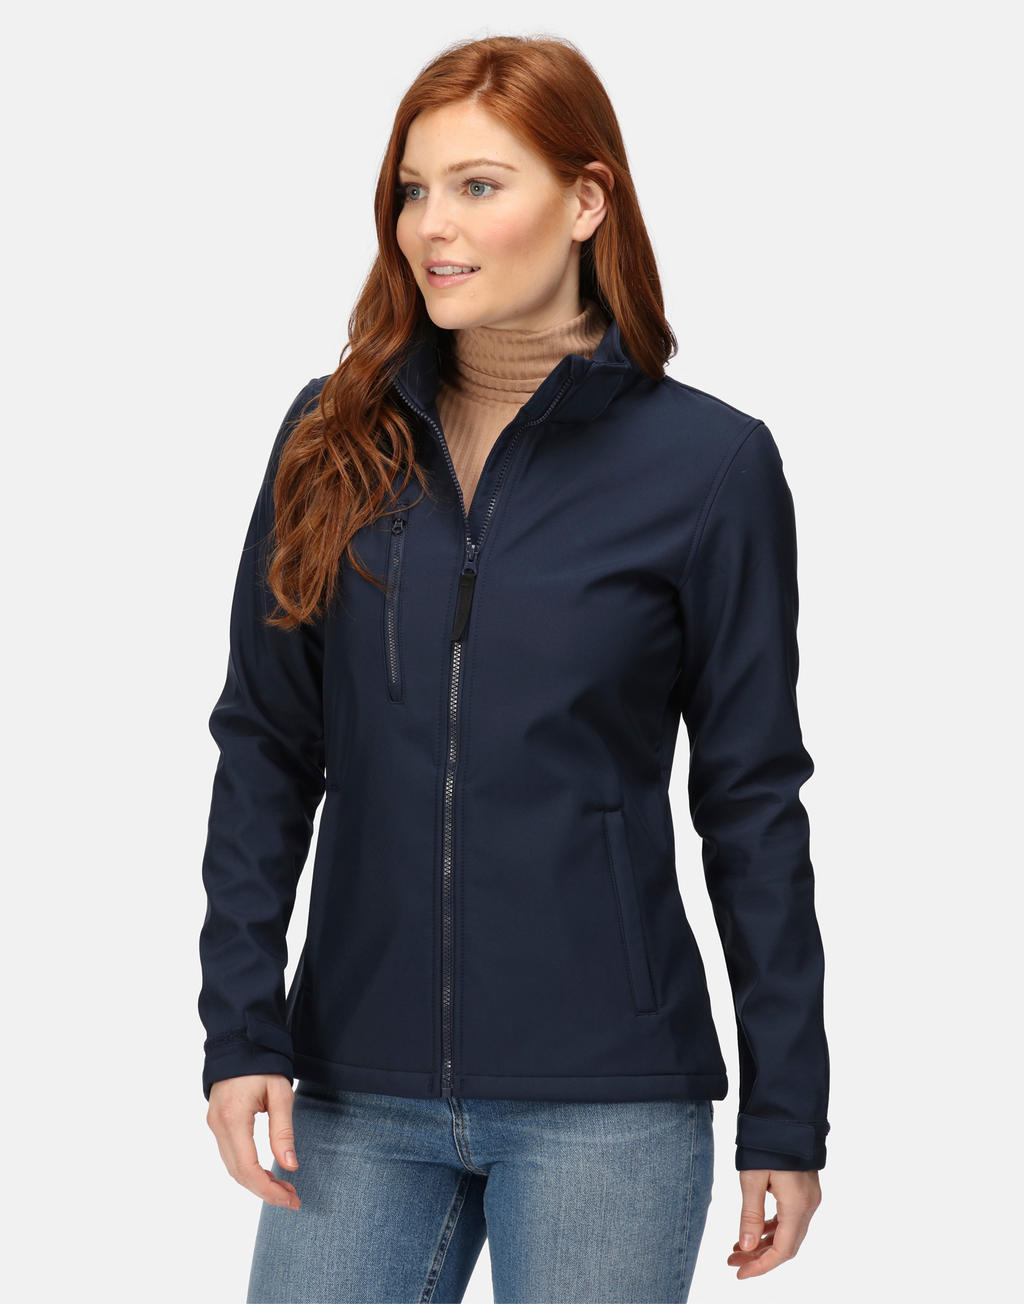  Womens Venturer 3-Layer Hooded Softshell Jacket in Farbe Black